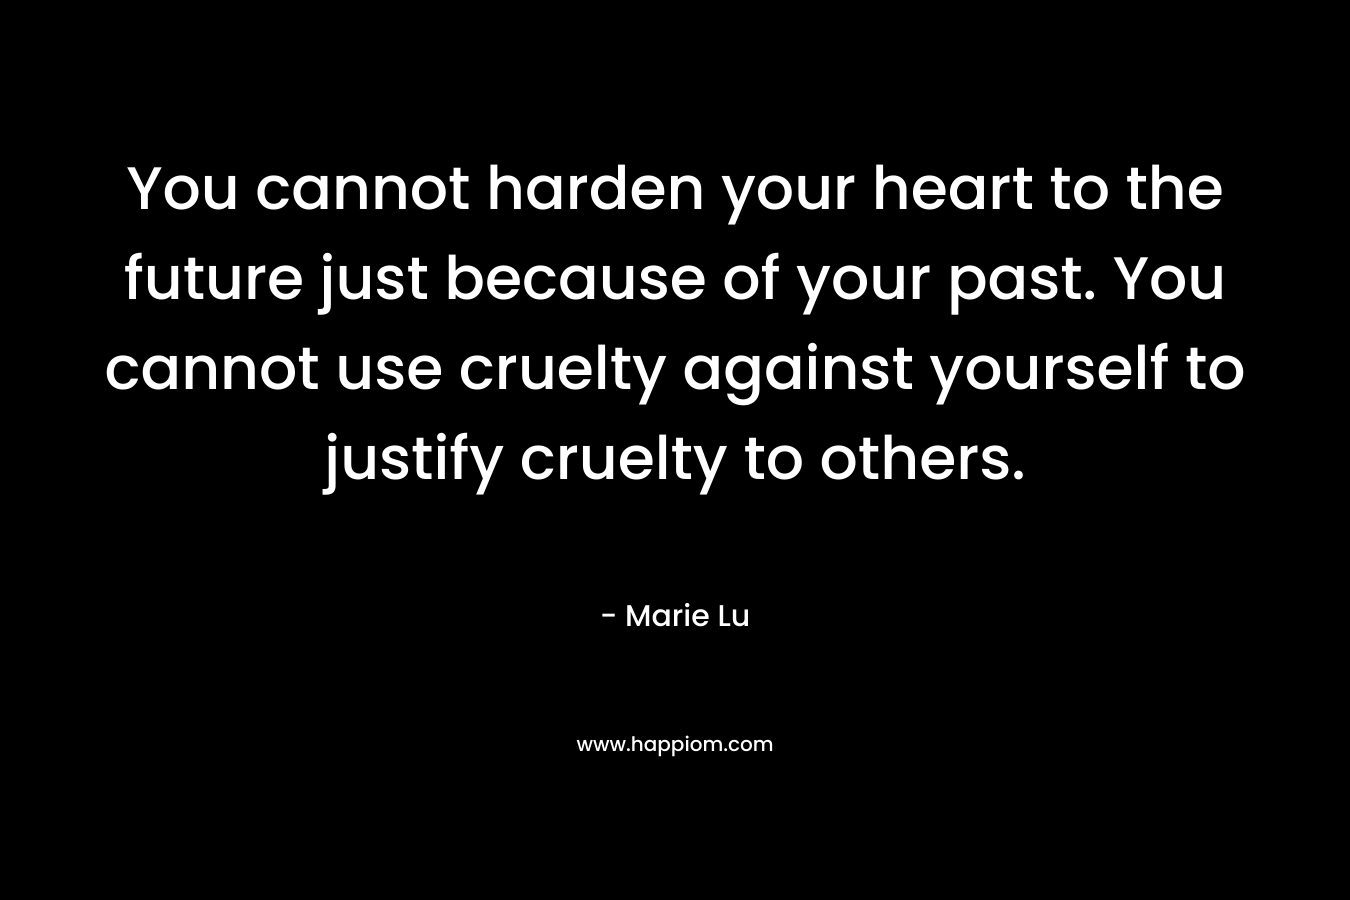 You cannot harden your heart to the future just because of your past. You cannot use cruelty against yourself to justify cruelty to others.